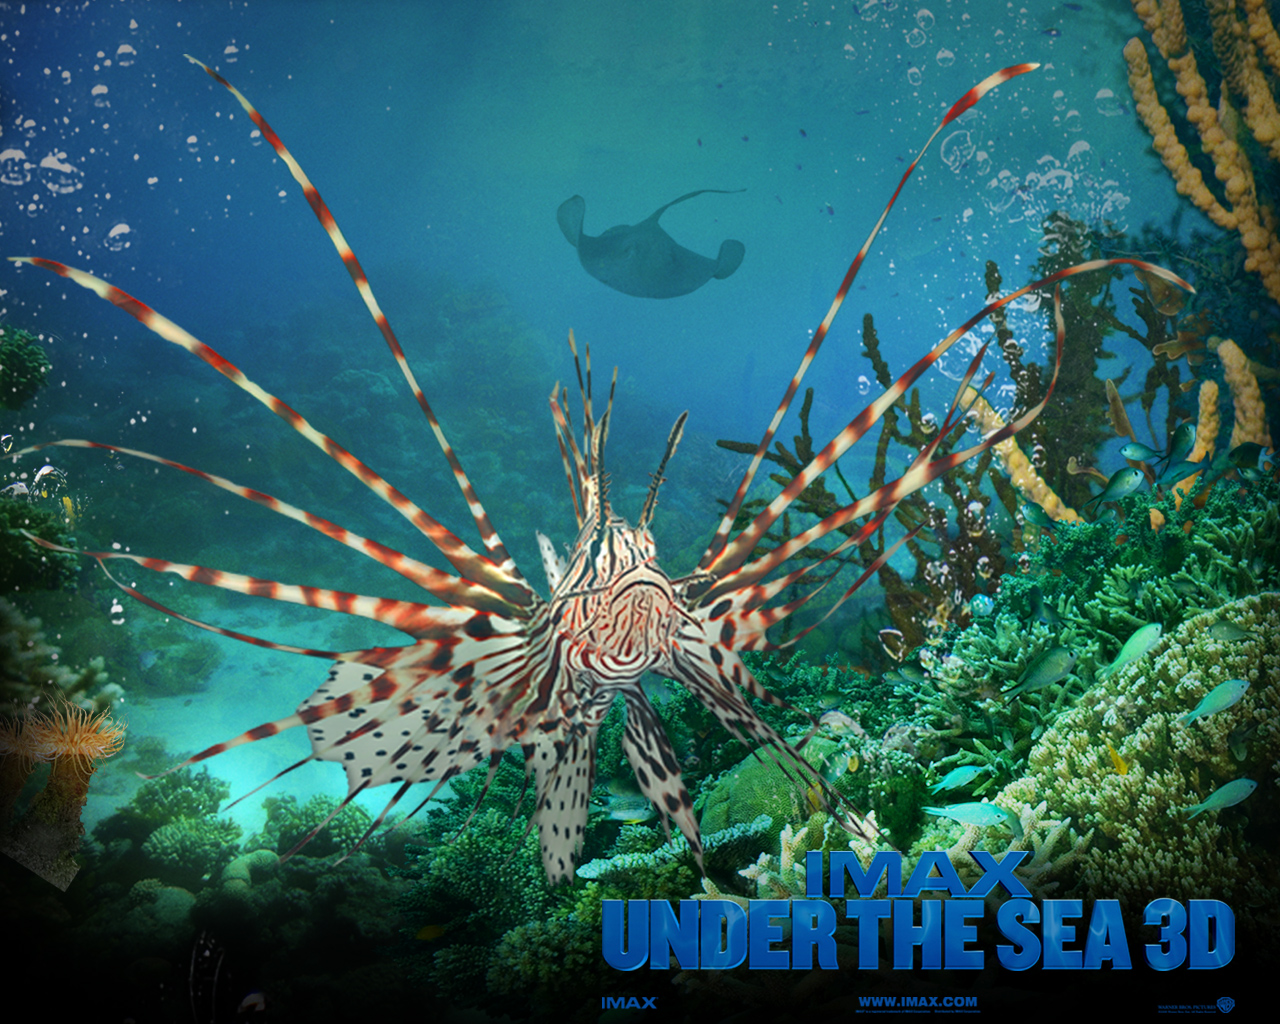 Download High quality Under The Sea 3D wallpaper / Movies / 1280x1024